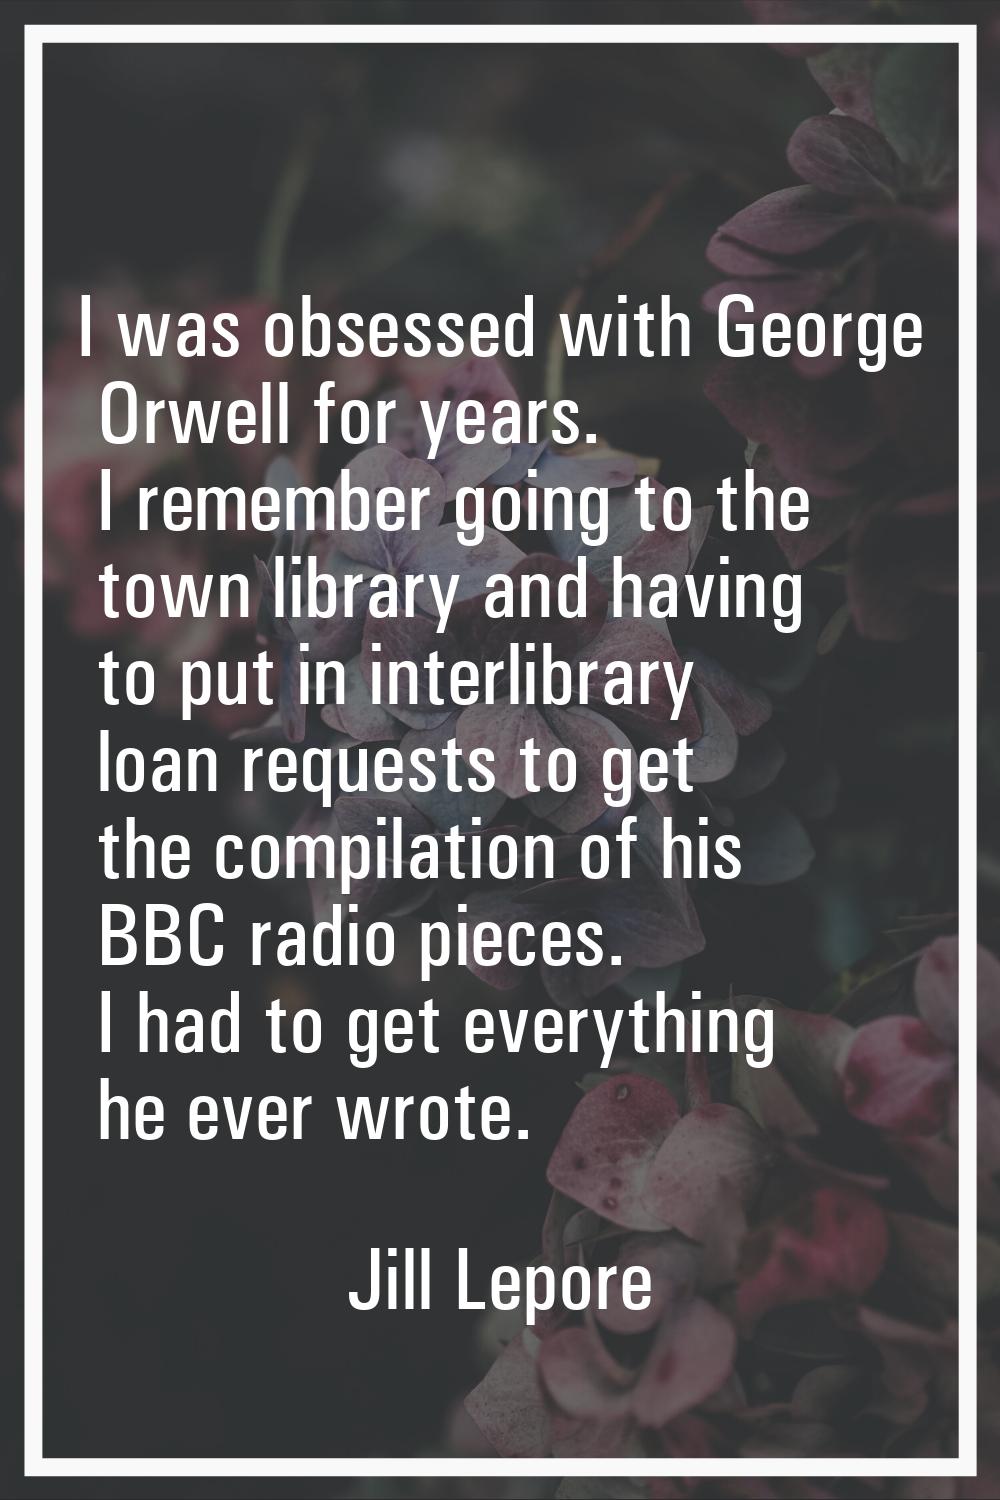 I was obsessed with George Orwell for years. I remember going to the town library and having to put